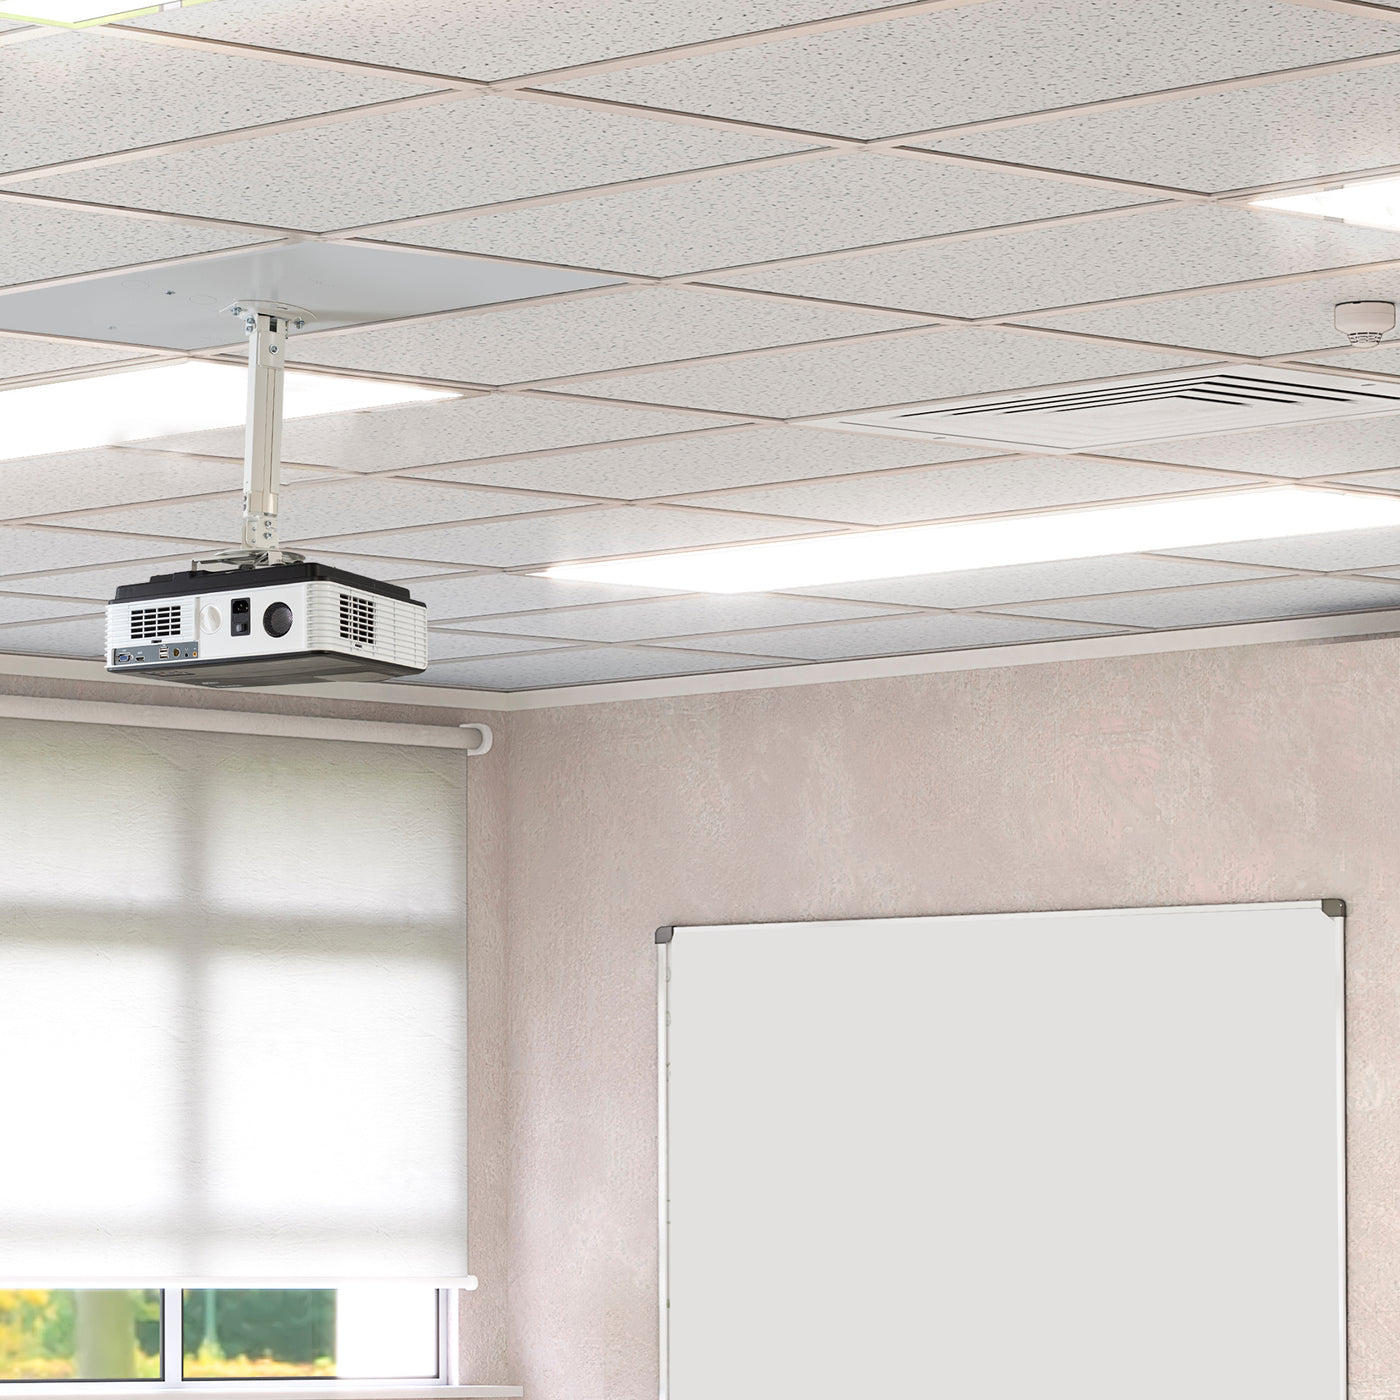 Universal White 2x2 ft Drop Ceiling Height Adjustable Projector Mount